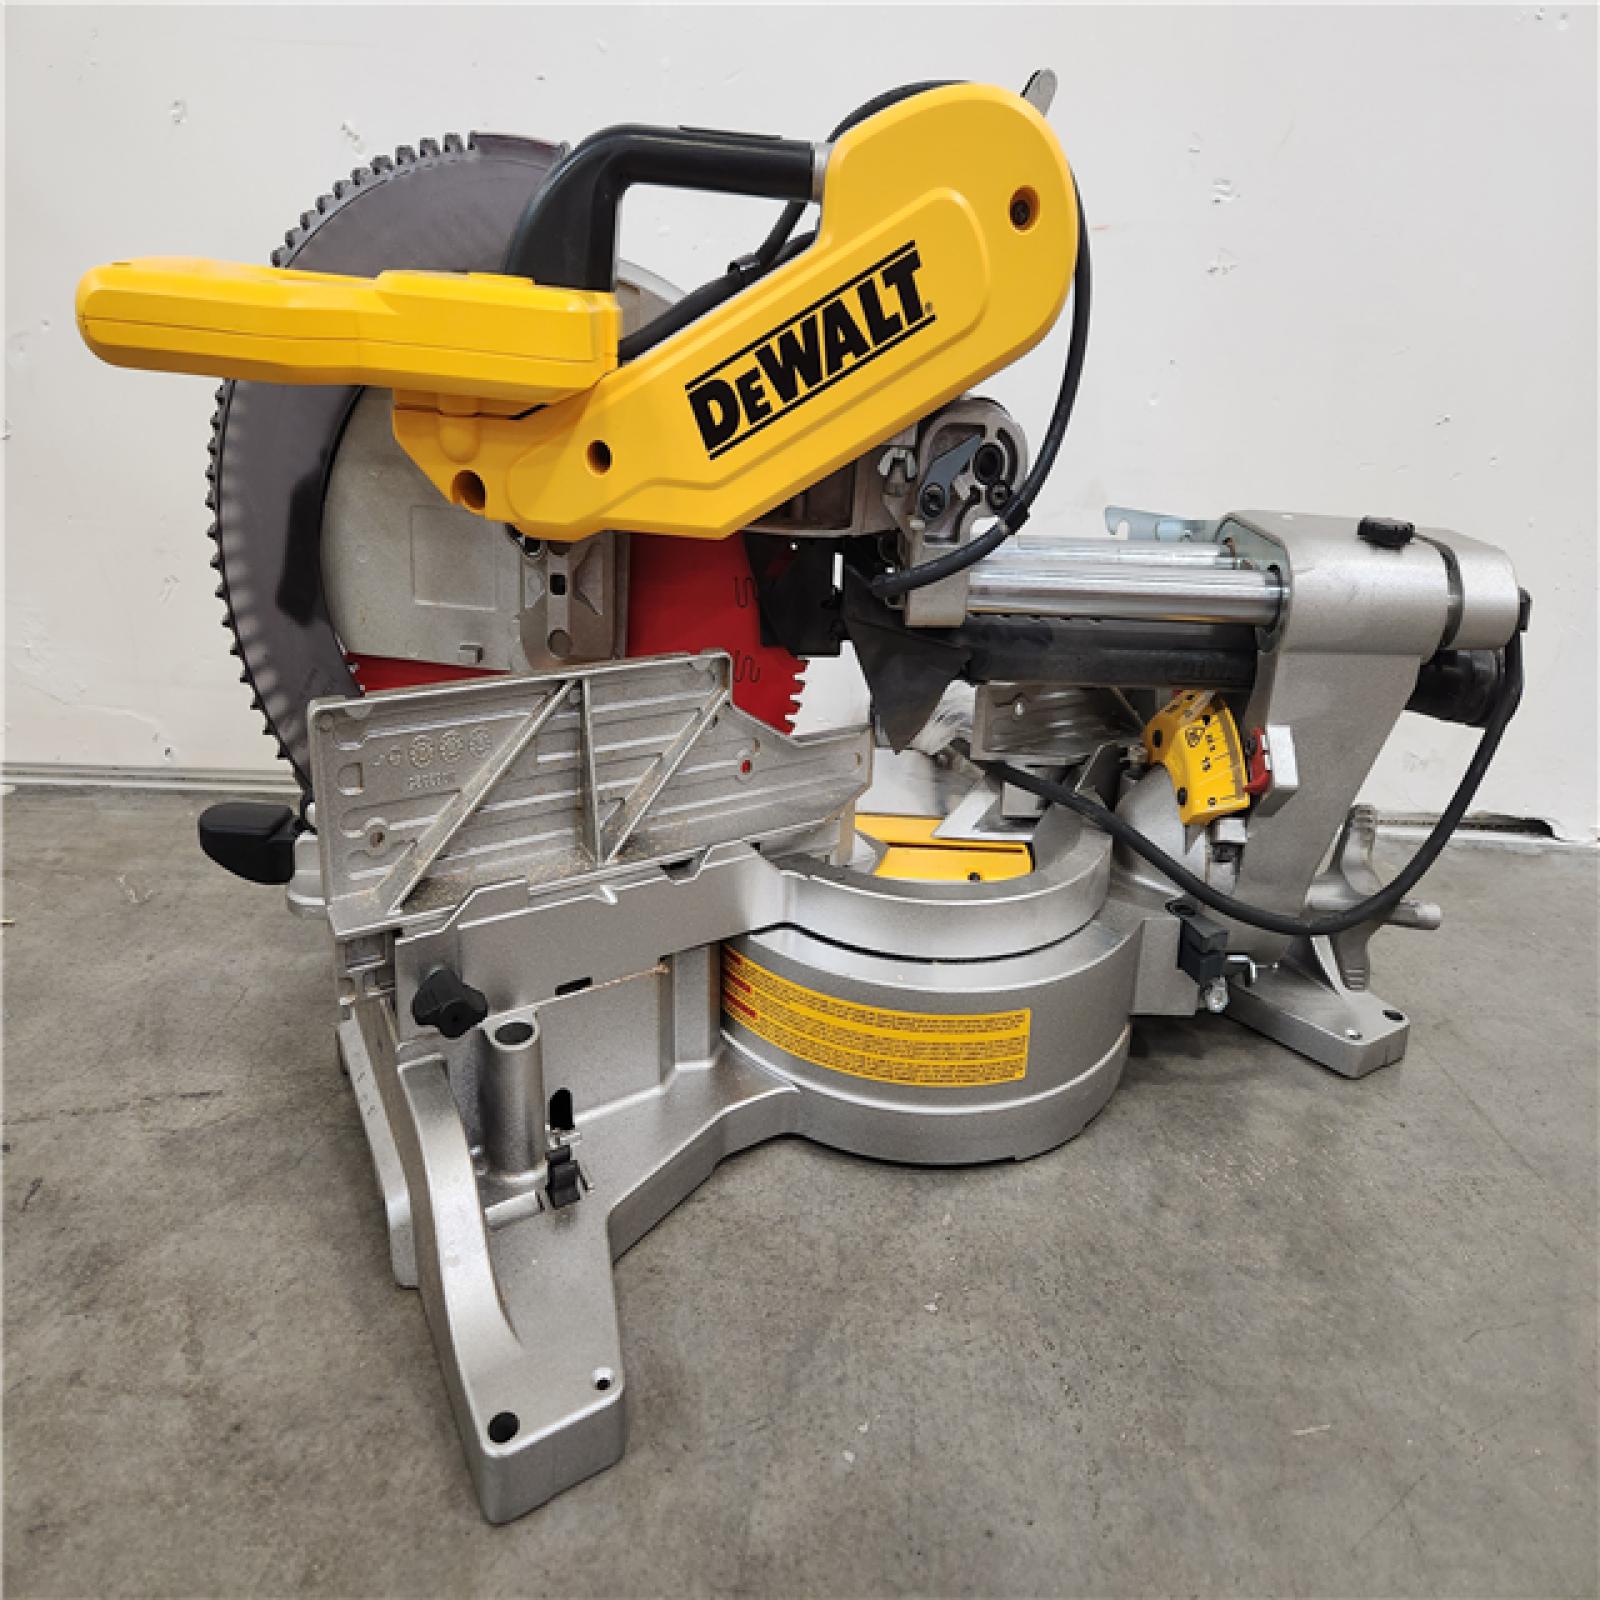 Phoenix Location Like NEW DEWALT 15 Amp Corded 12 in. Double Bevel Sliding Compound Miter Saw with XPS technology, Blade Wrench and Material Clamp DWS780